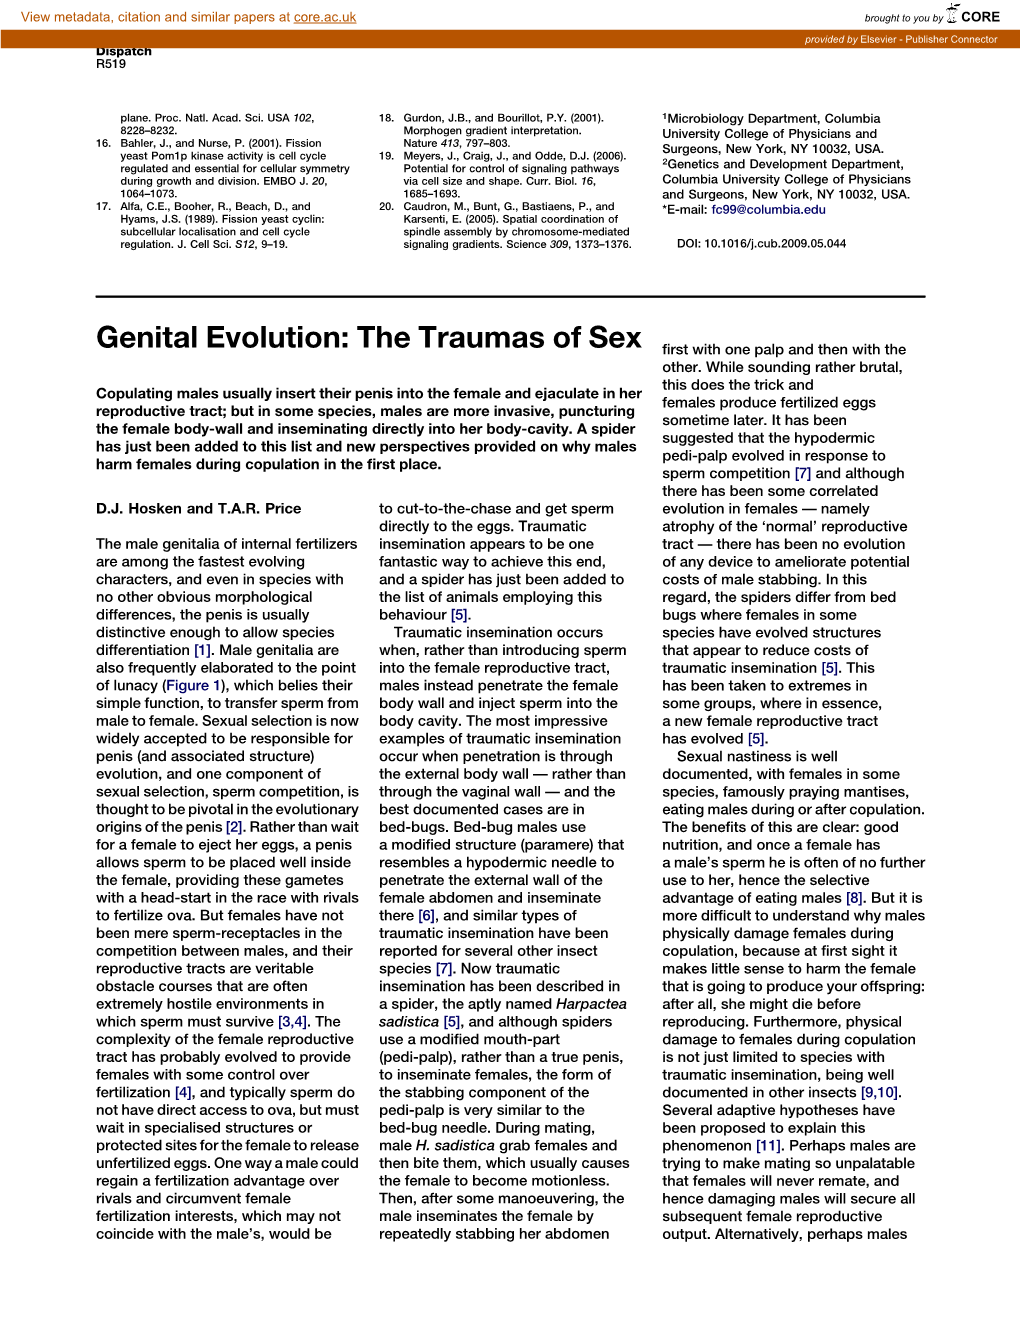 Genital Evolution: the Traumas of Sex ﬁrst with One Palp and Then with the Other